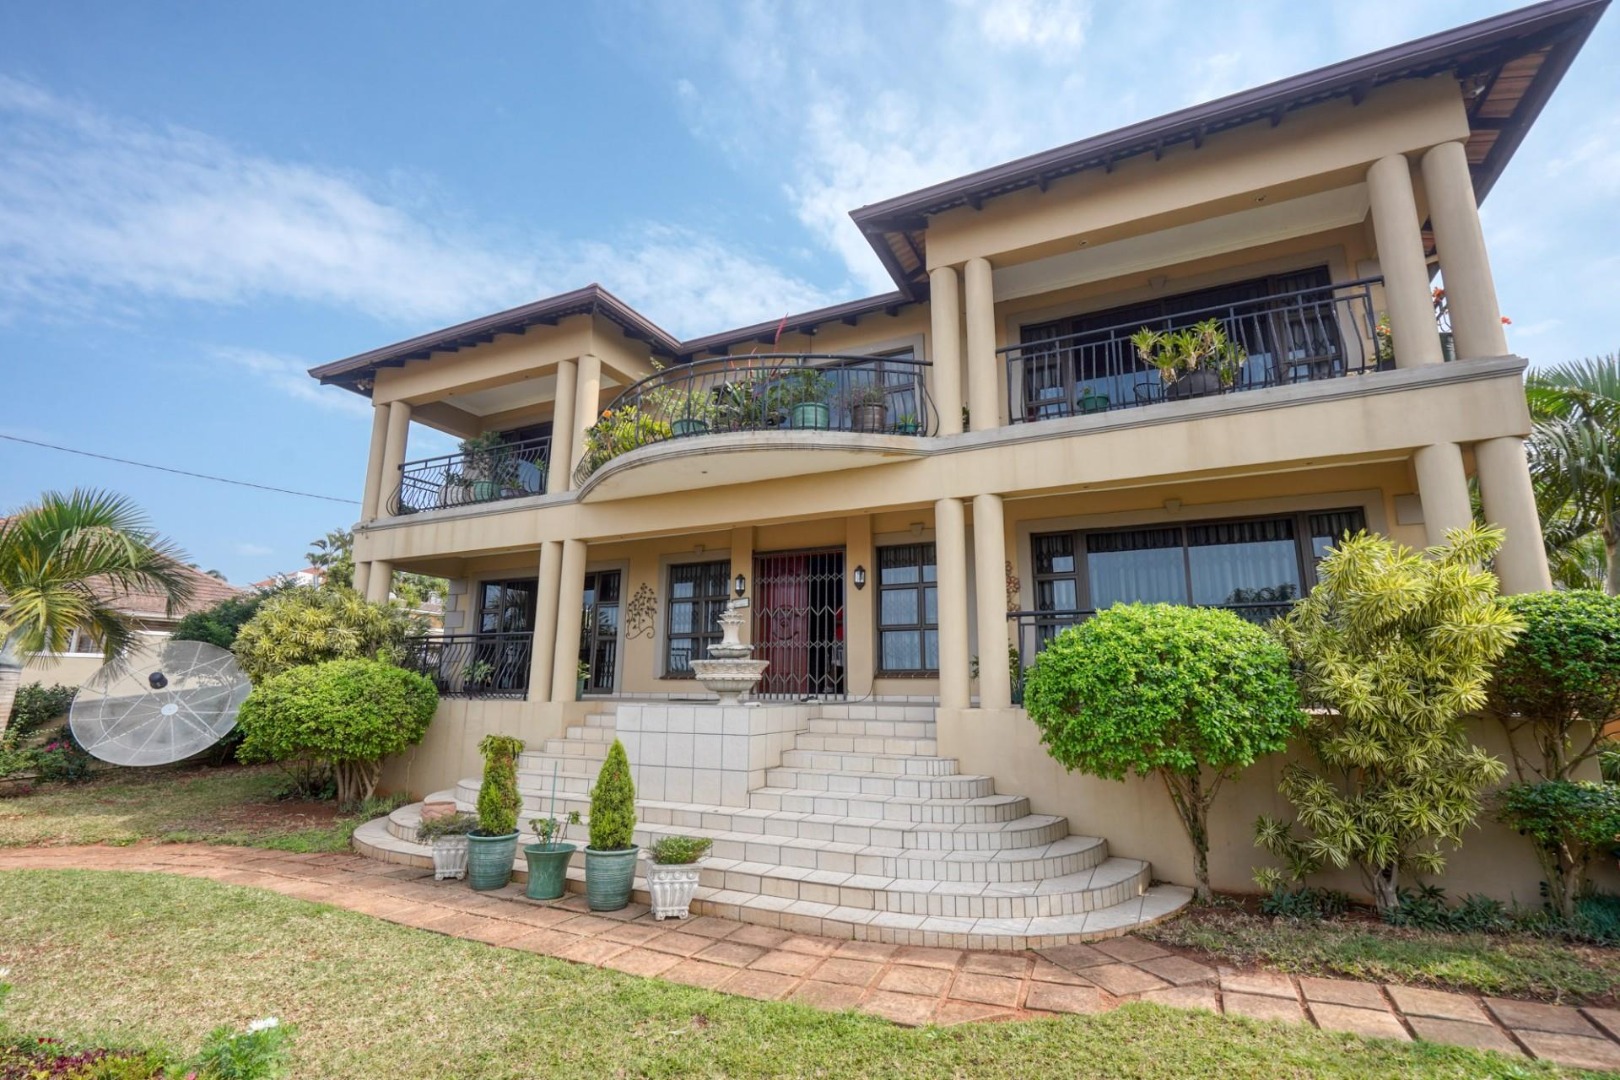  Lovely Double Storey 7 Bedroom House For Sale in Glenwood